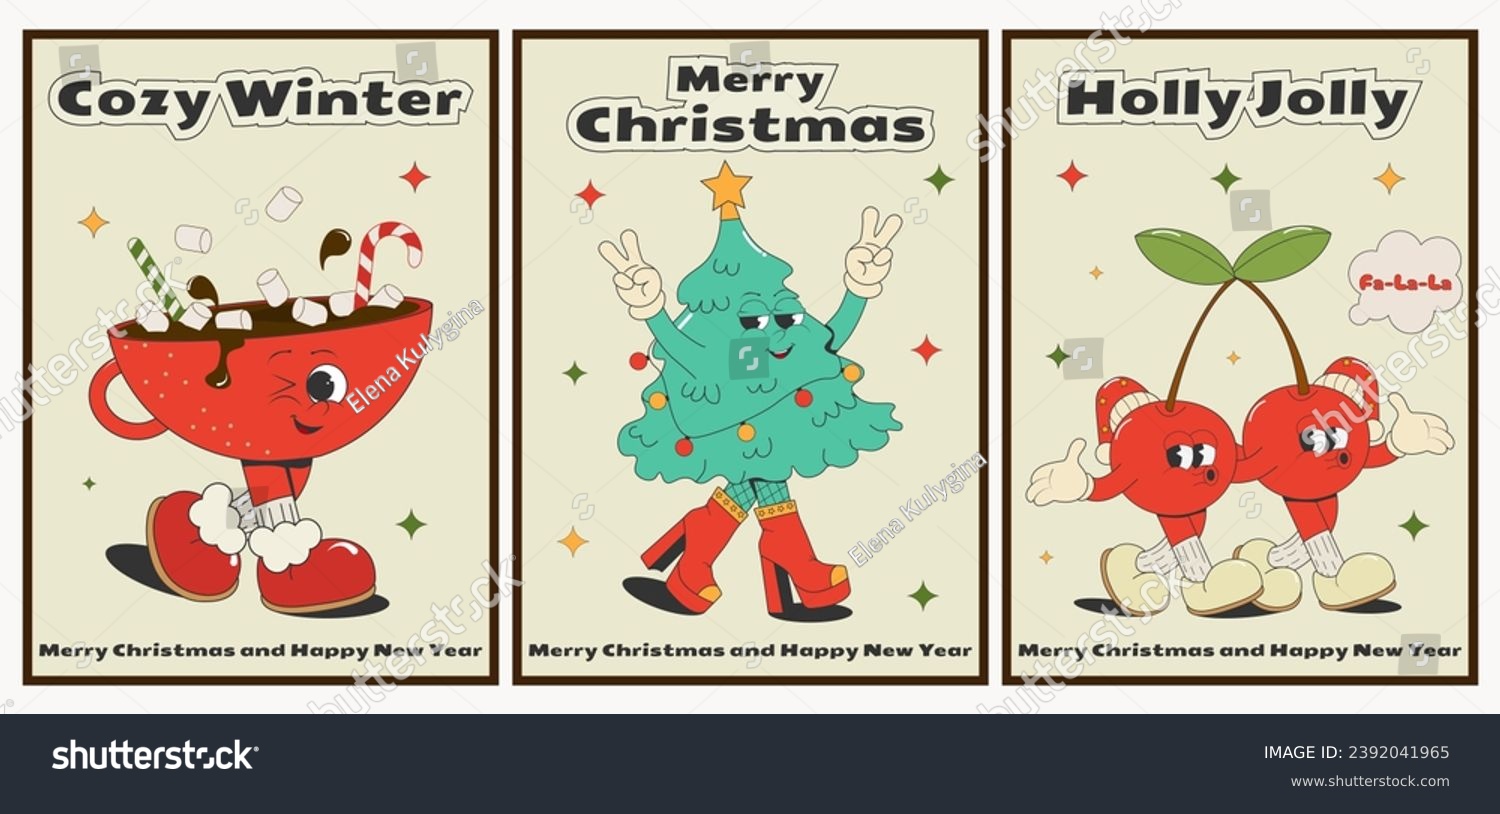 SVG of set of groovy Christmas posters with a cartoon Christmas tree, a cup of cocoa and funny cherries in Santa's hat. Vector illustration in the comic retro style of the 60s-70s. svg